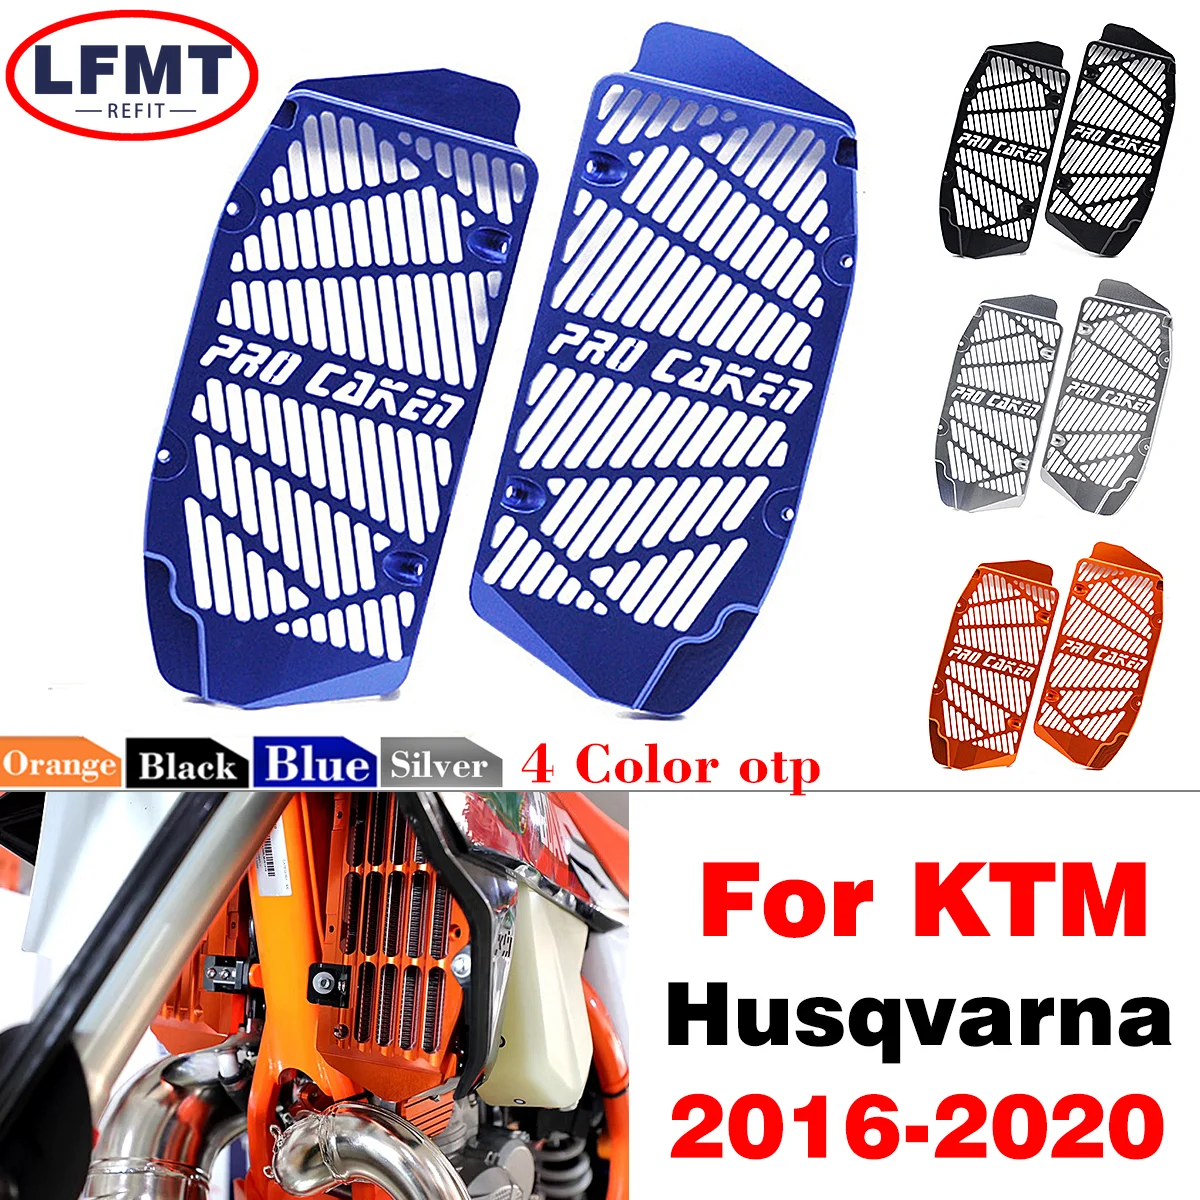 

Radiator Grille Guard Grill Cover Protector For KTM XC XCF SX SXF XCW XCFW EXC EXC-F For Husqvarna TC TE TX FC FE FX 2017-2022